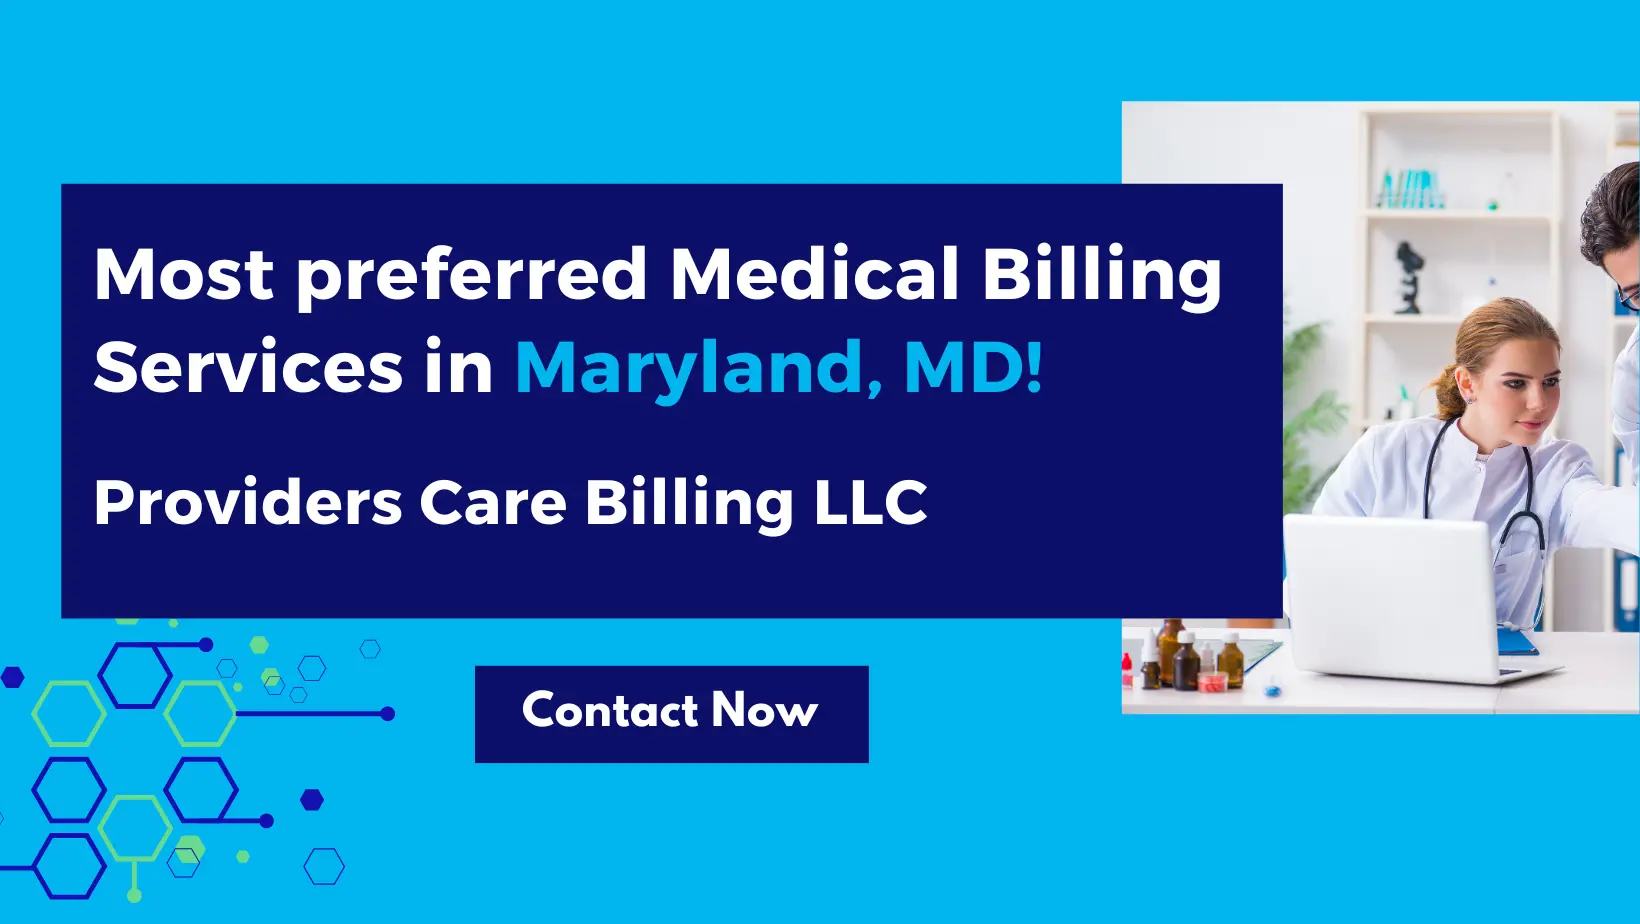 Most preferred Medical Billing Services in Maryland, MD!